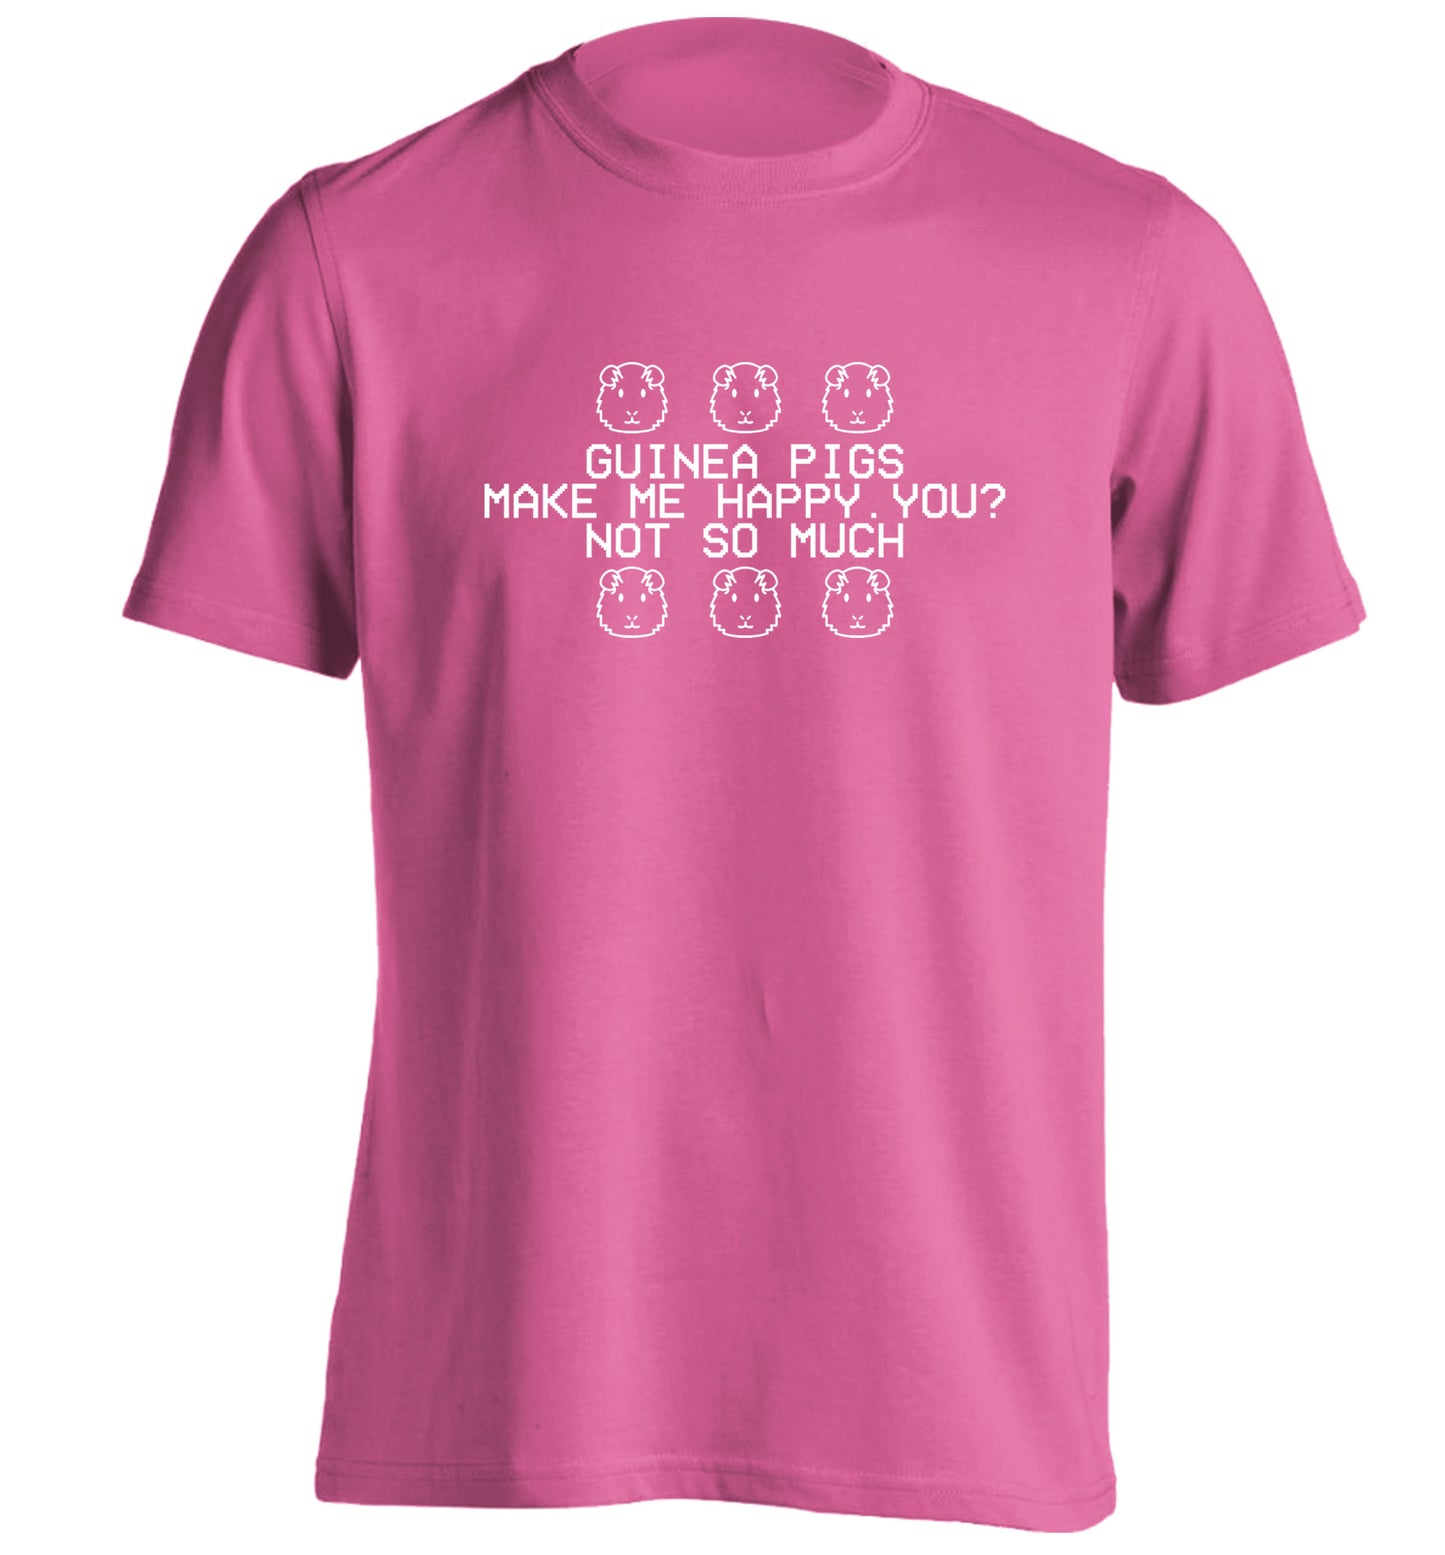 Guinea pigs make me happy, you not so much adults unisex pink Tshirt 2XL